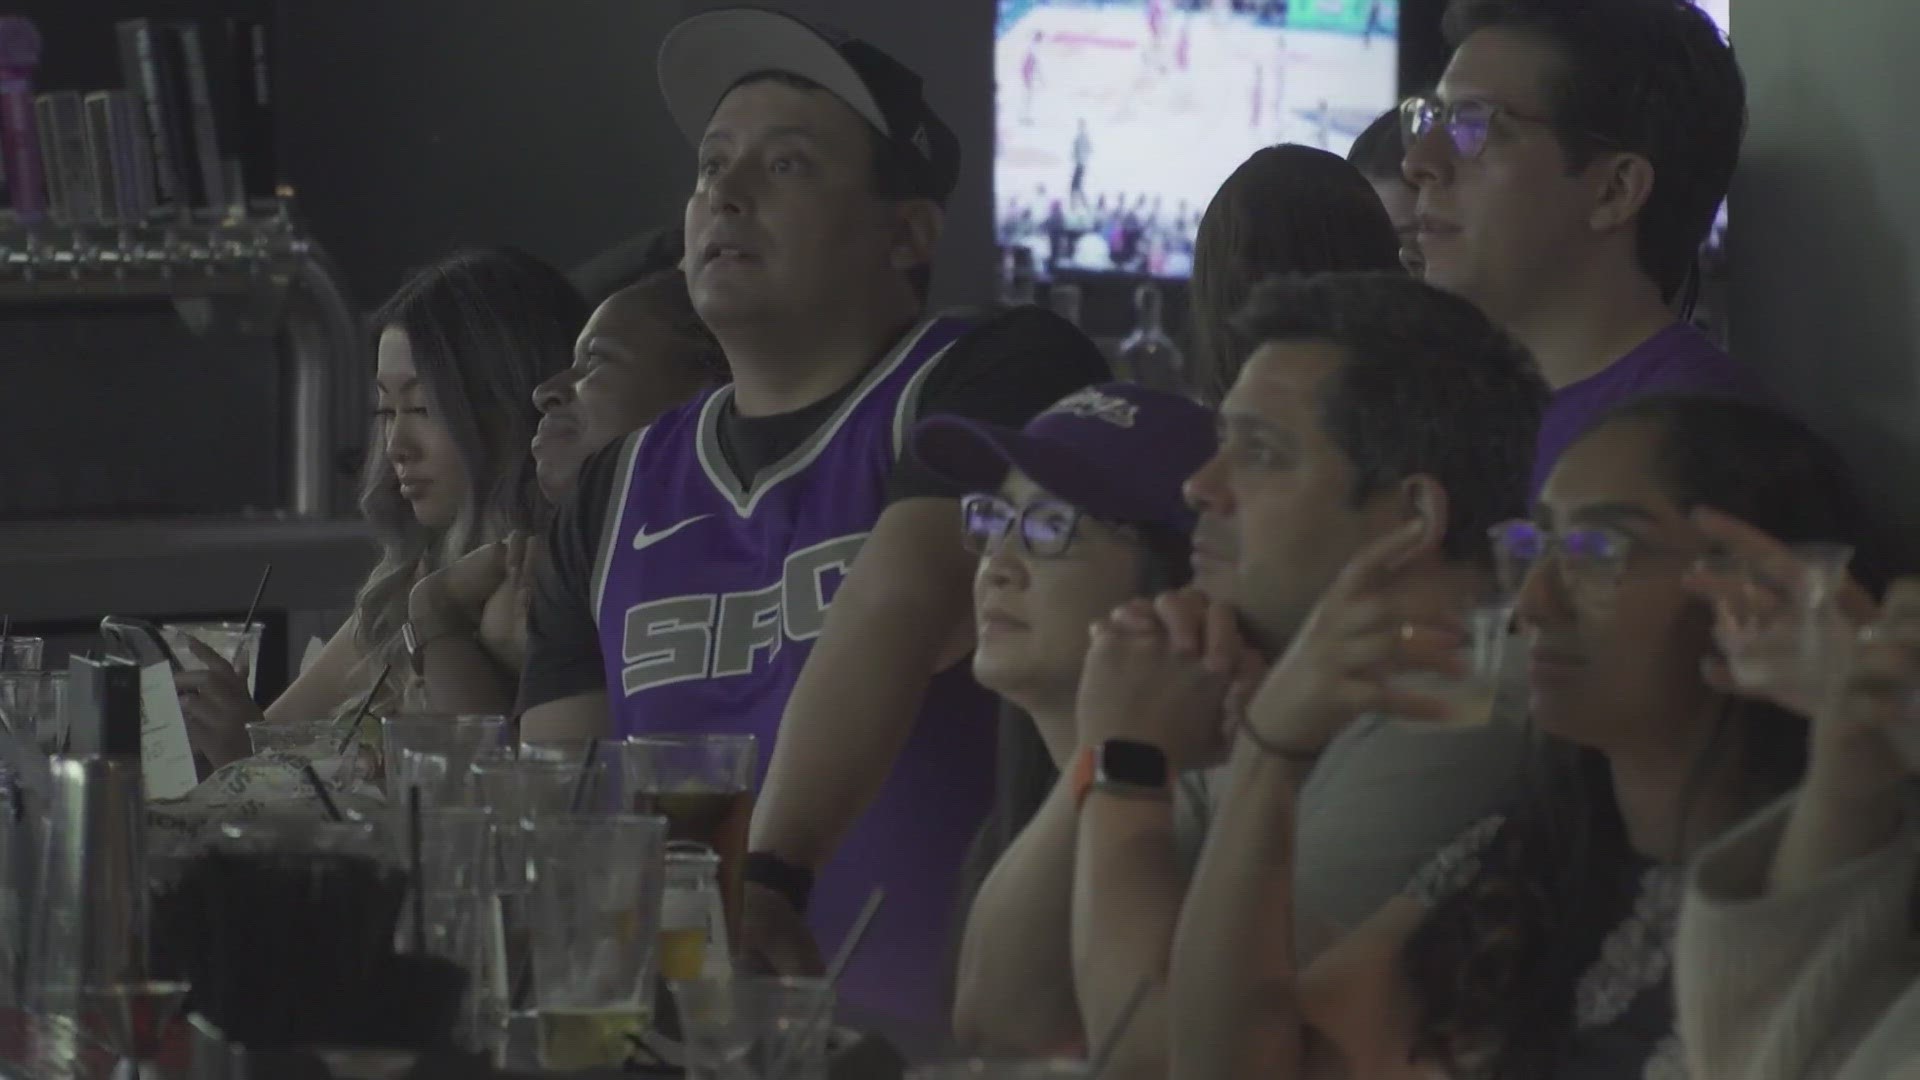 Kings fans showed up at home to watch their team play nearly 2,000 miles away in New Orleans.